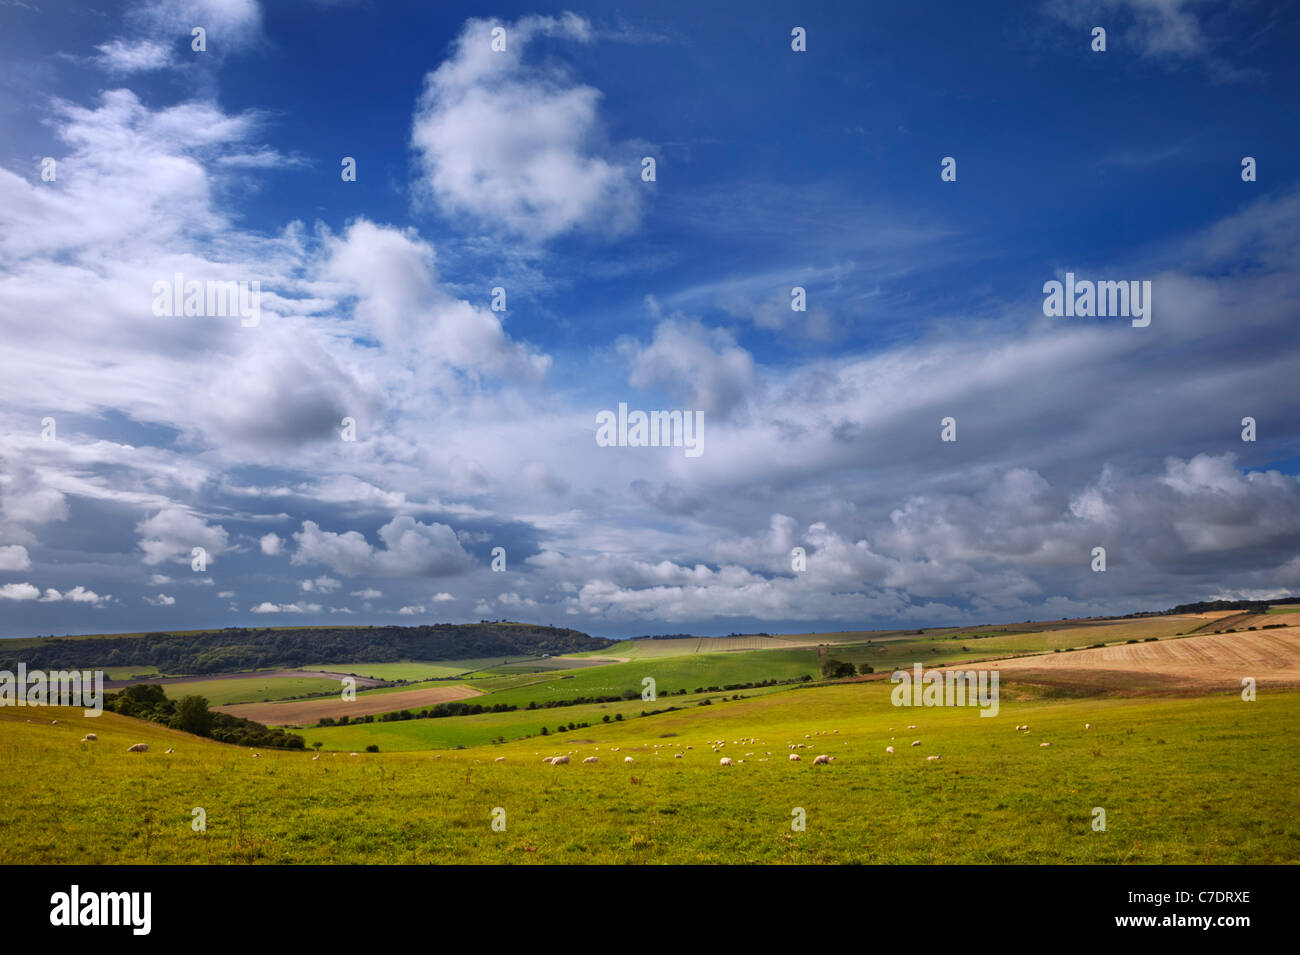 Pecore sul South Downs vicino a Worthing Sussex, Inghilterra. Foto Stock